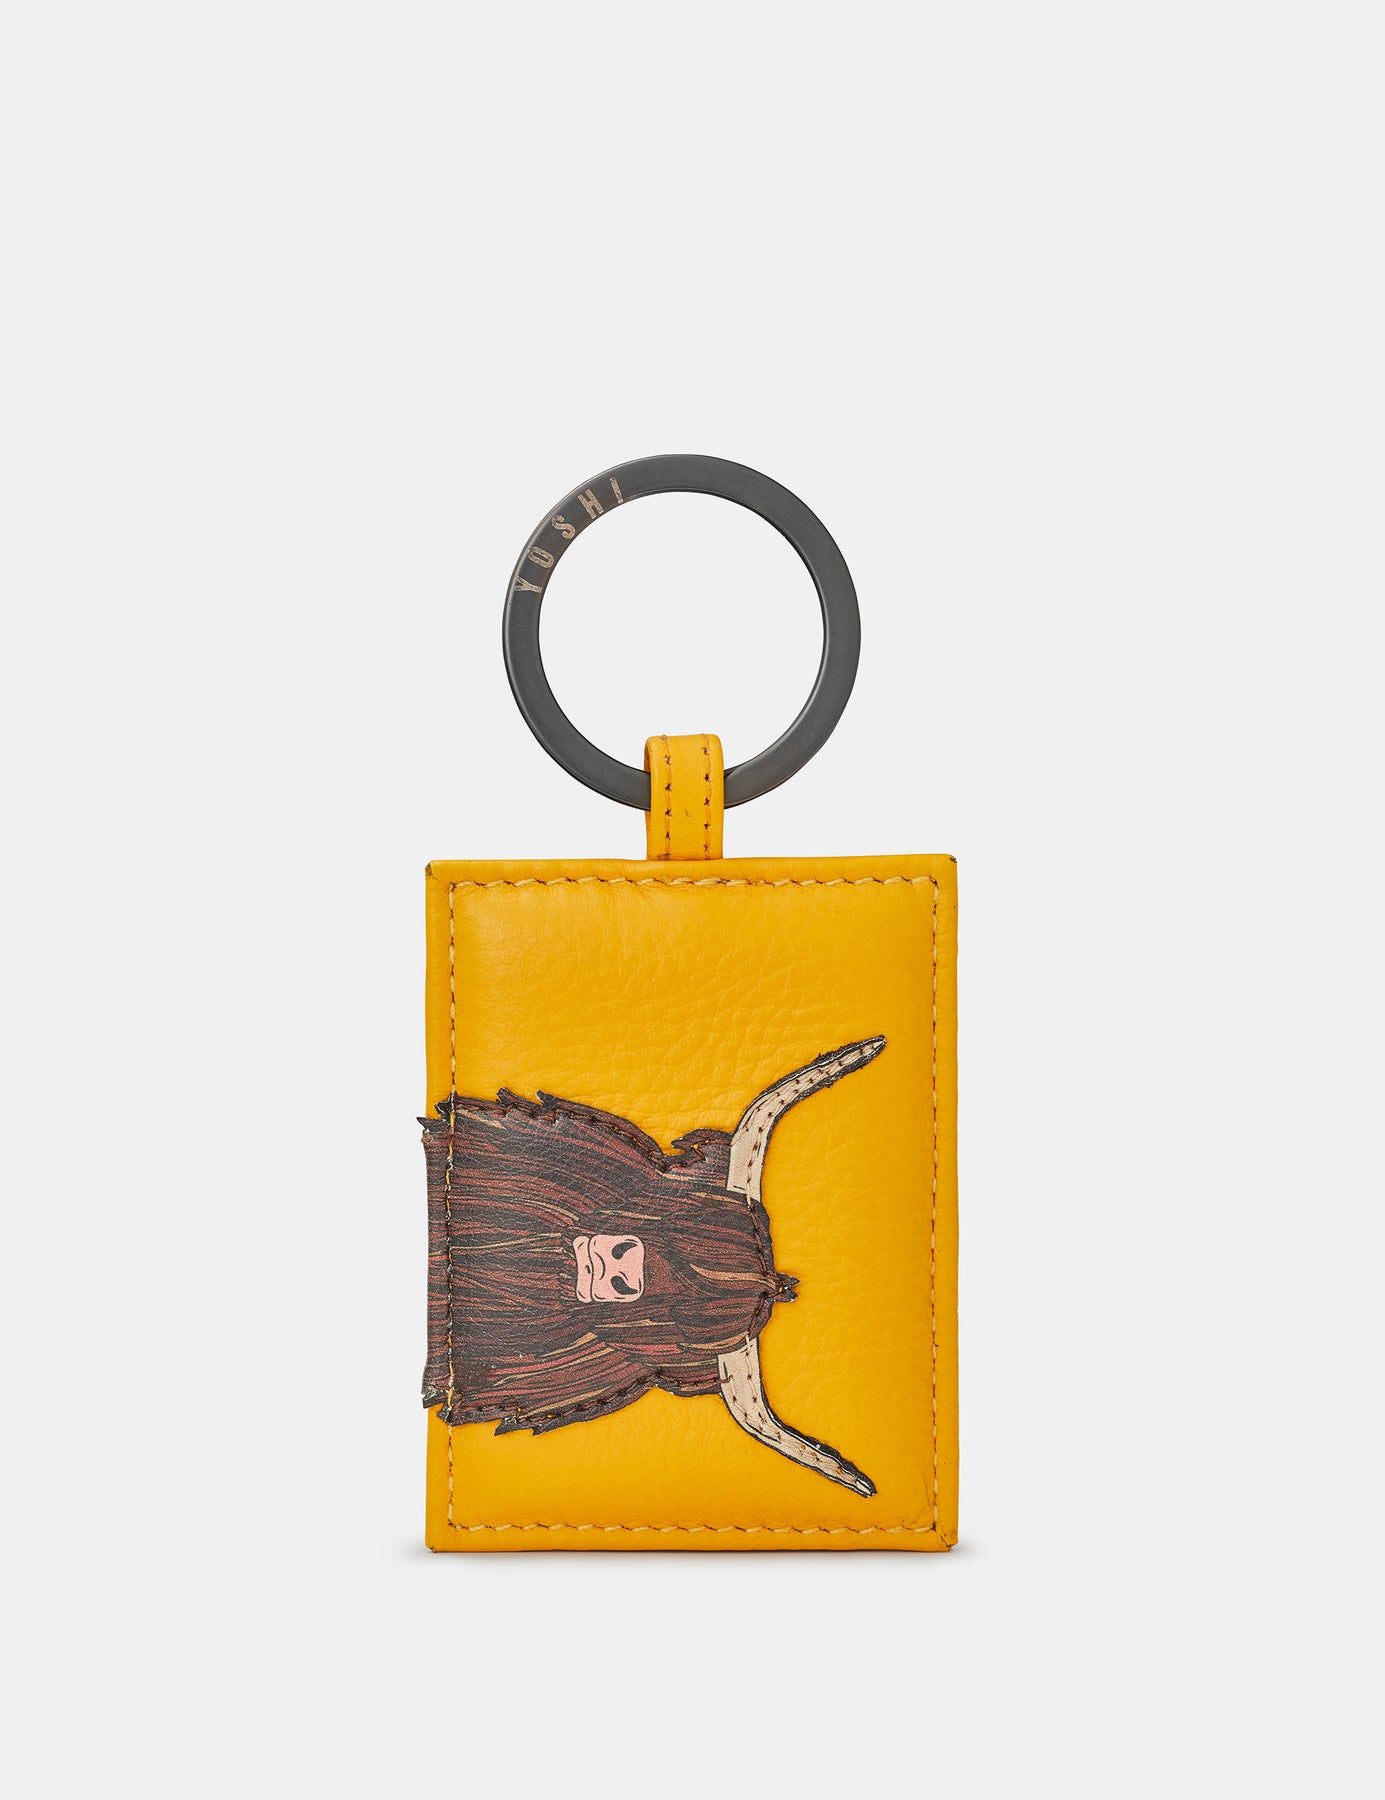 Highland Cow Yellow Leather Keyring For Men And Women By Yoshi